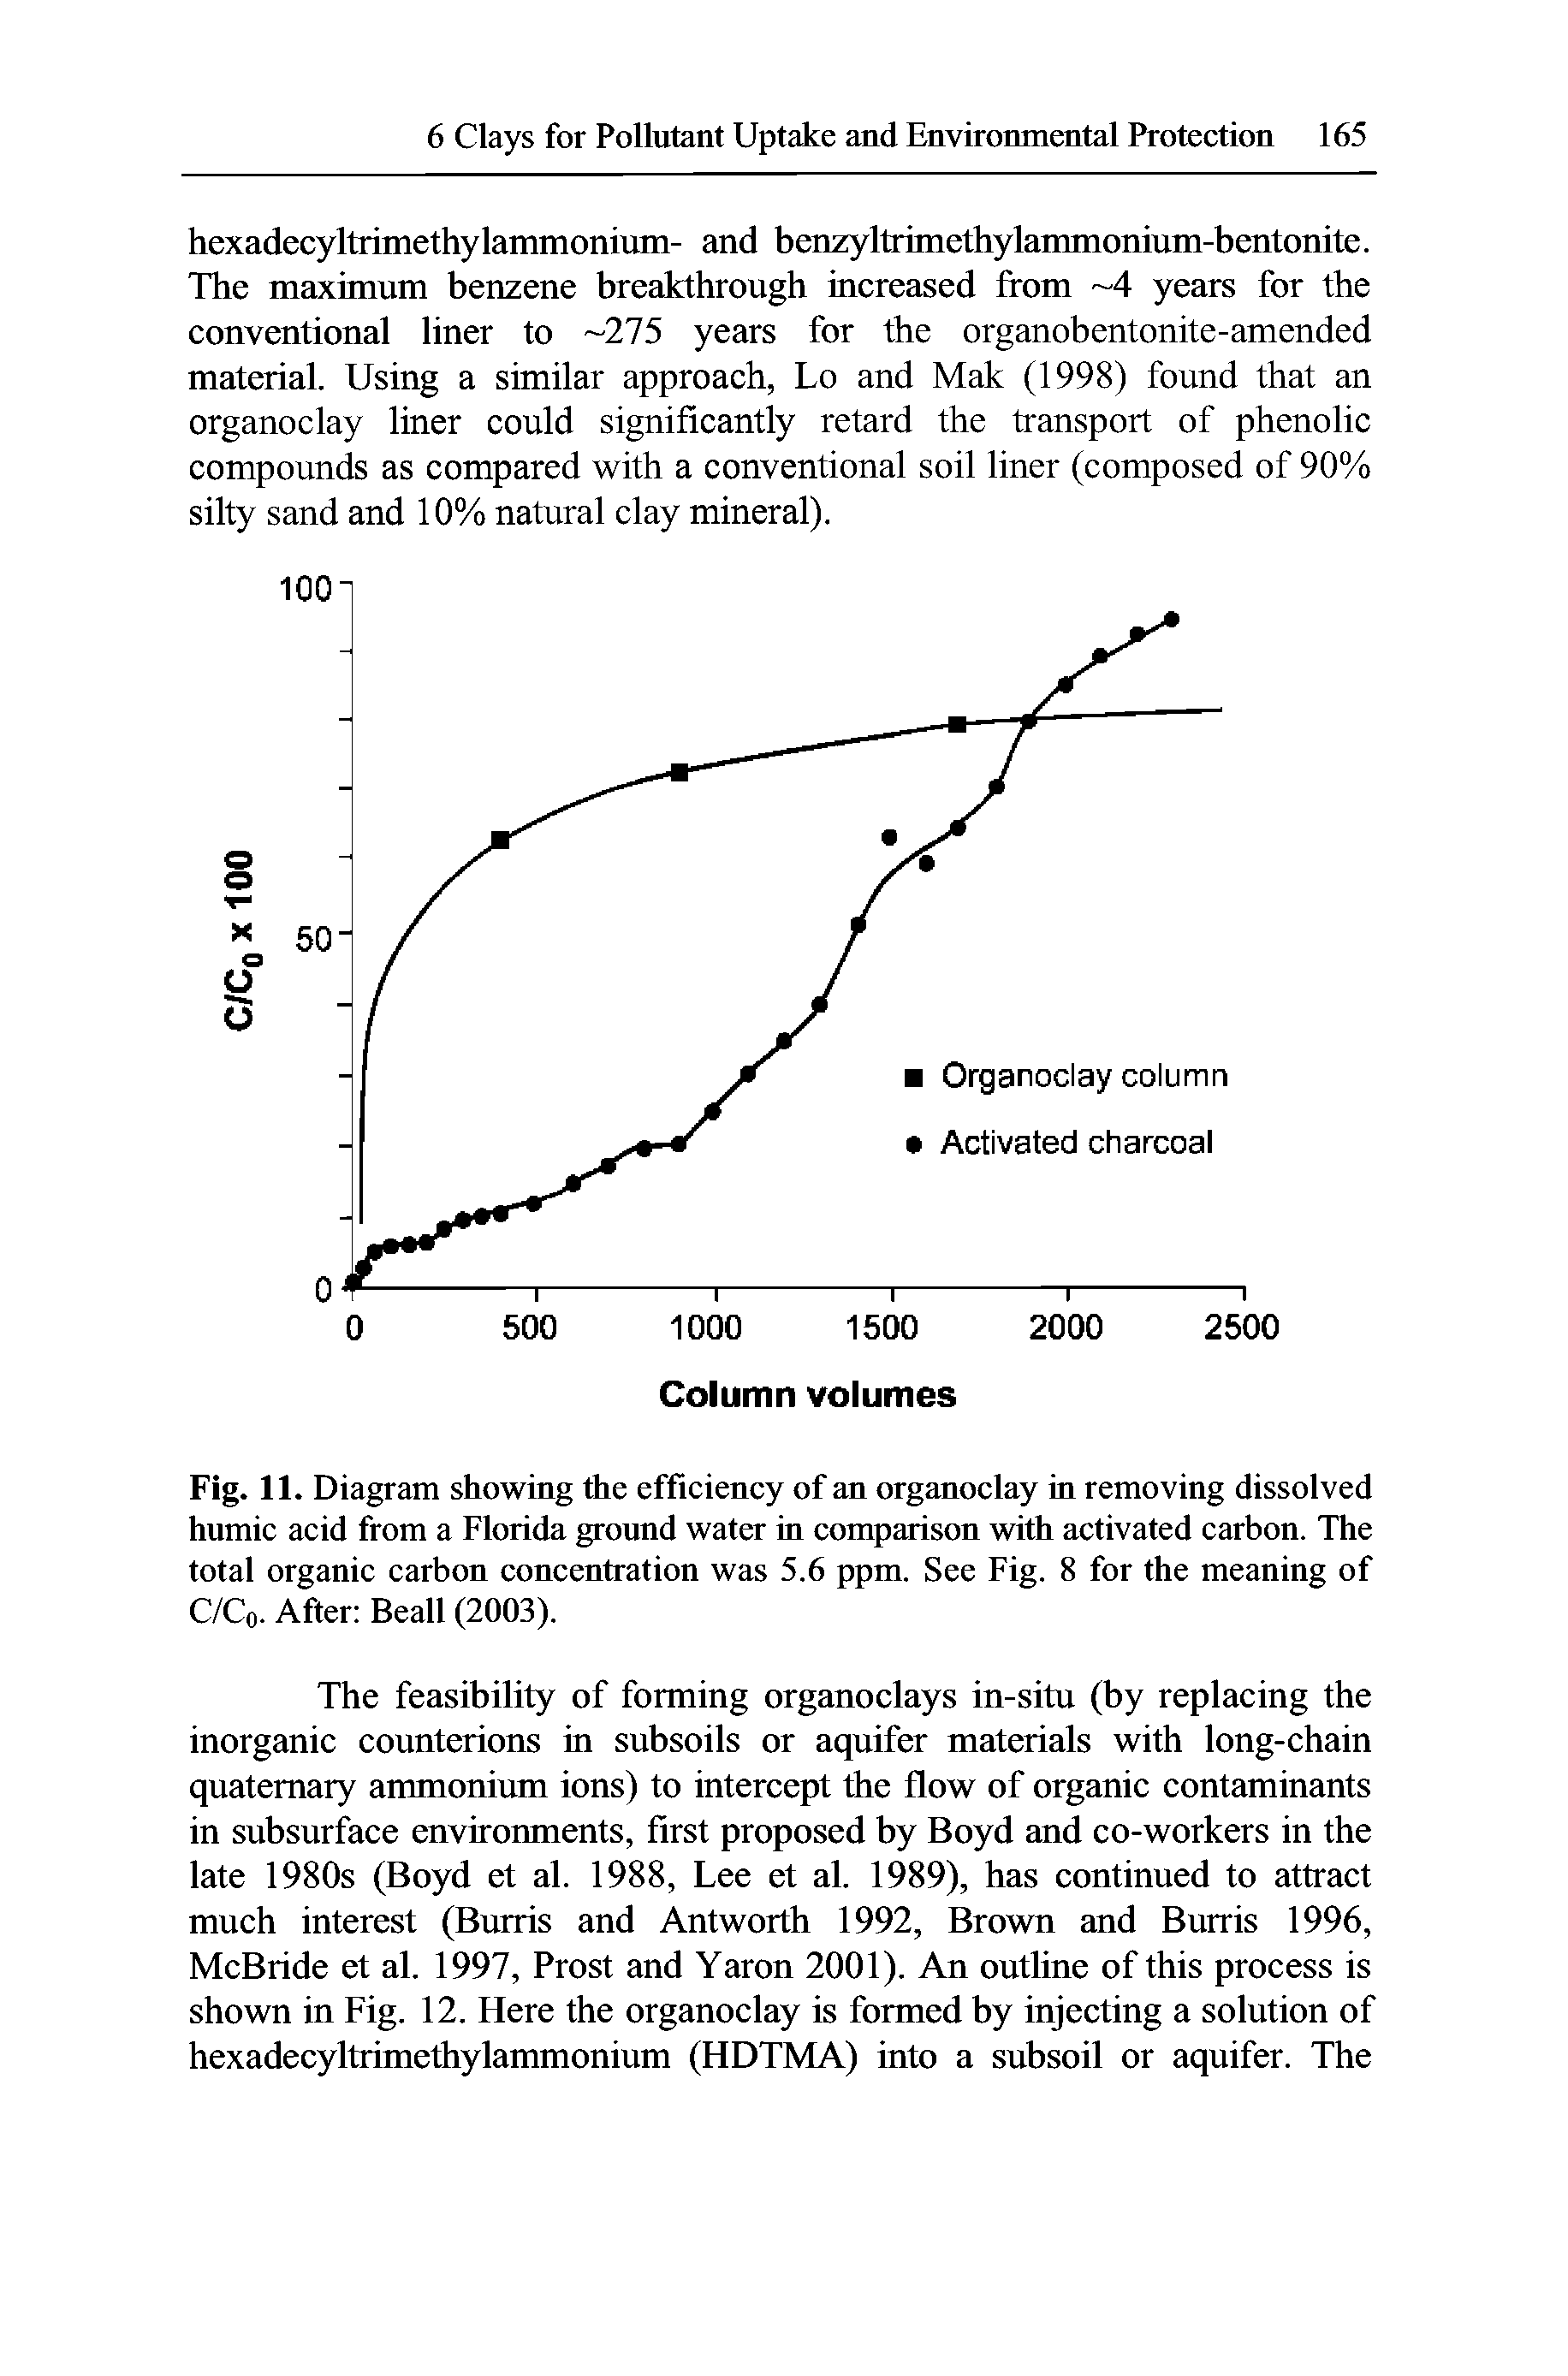 Fig. 11. Diagram showing the efficiency of an organoclay in removing dissolved humic acid from a Florida ground water in comparison with activated carbon. The total organic carbon concentration was 5.6 ppm. See Fig. 8 for the meaning of C/C0. After Beall (2003).